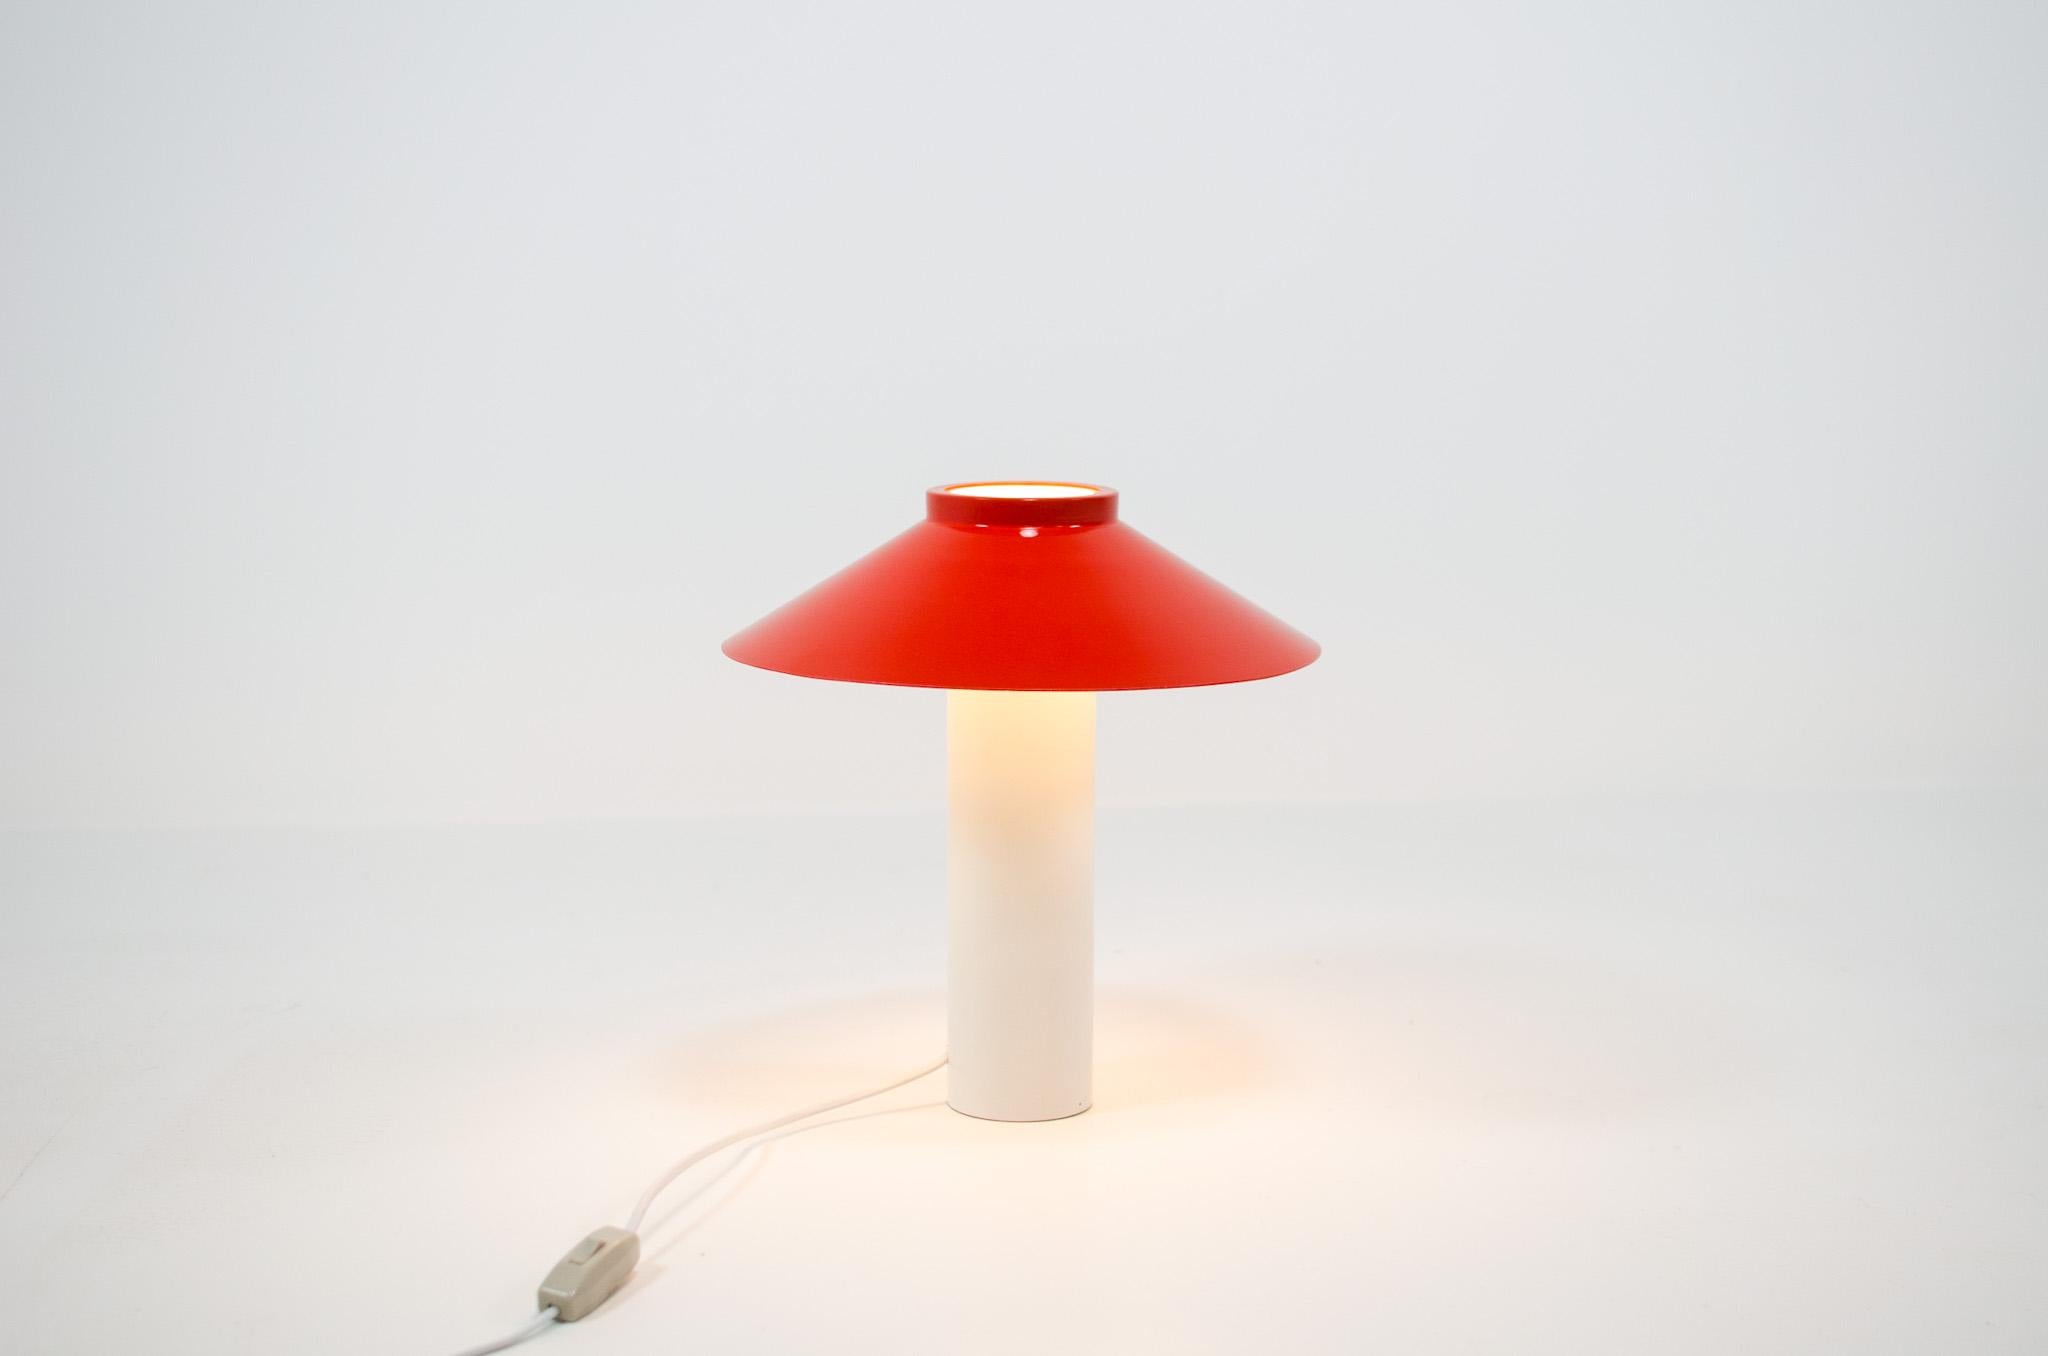 Extremely rare Atlantis table lamp by Hans Schwazer for Holmegaard (Denmark, 1976).

This minimalist mushroom lamp is made out of powder coated metal. It consists of 2 pieces, the body and the red shade, what you see is what you get.

In perfect